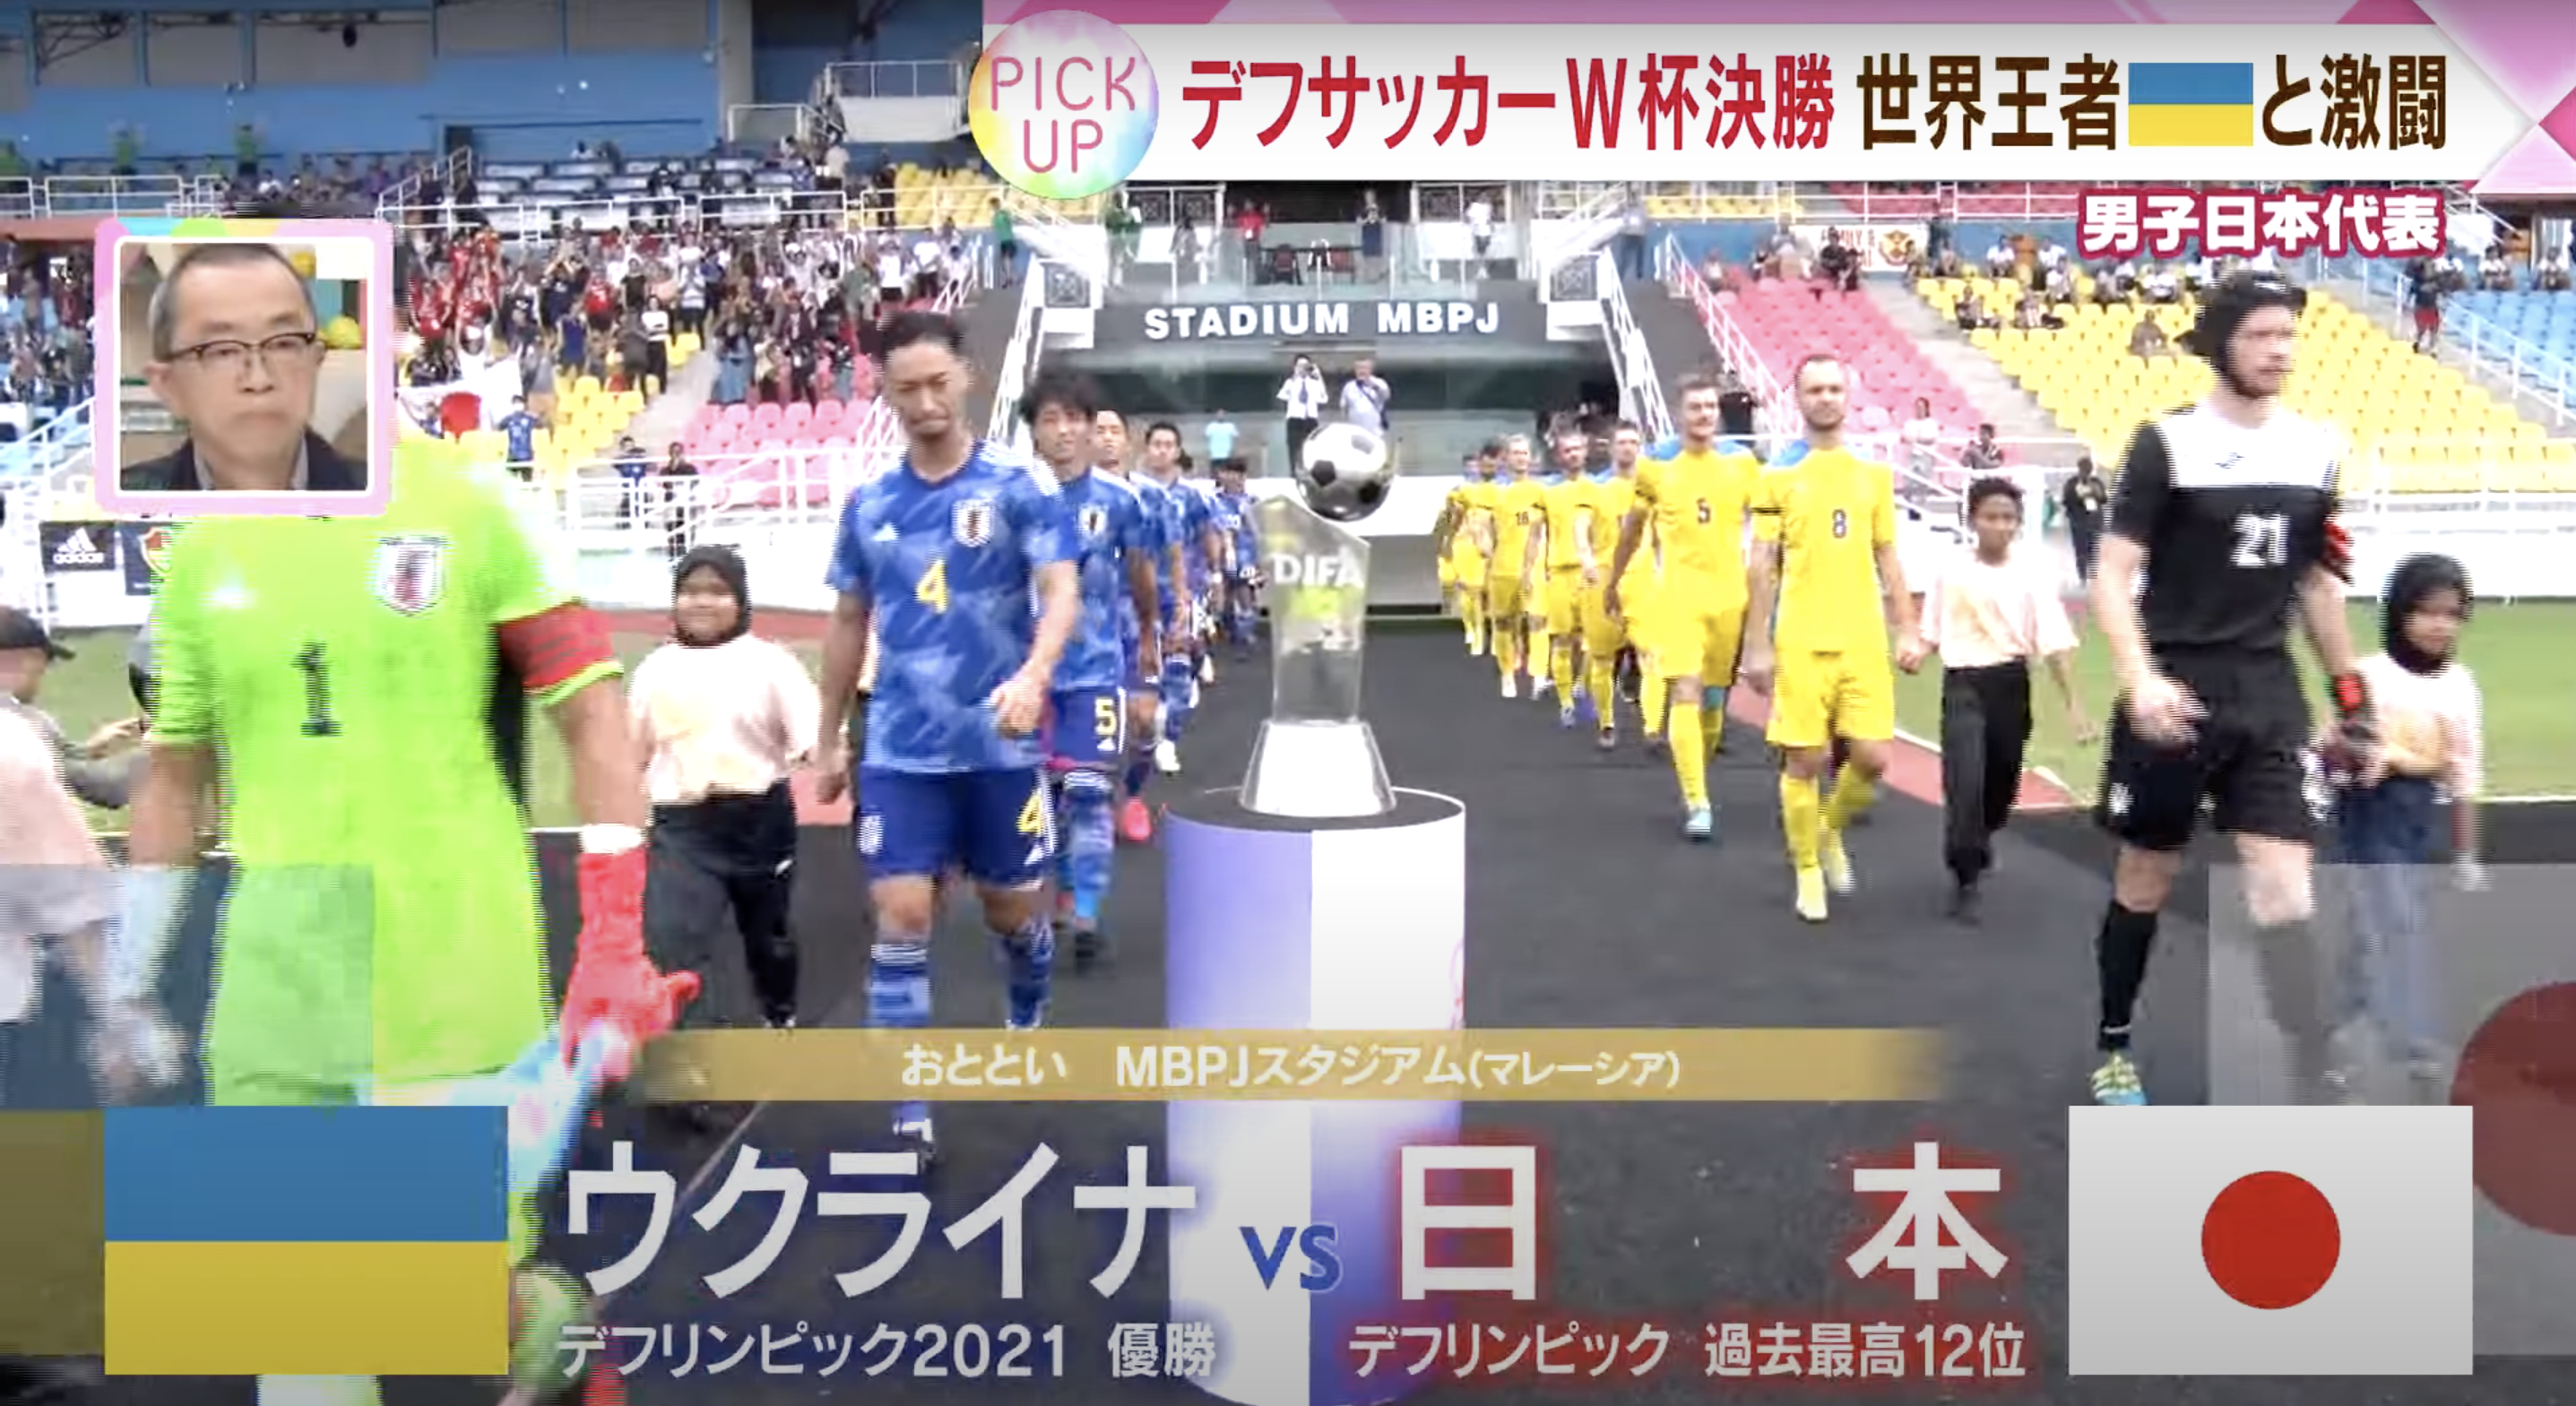 Japanese sports TV talks about the WDFC